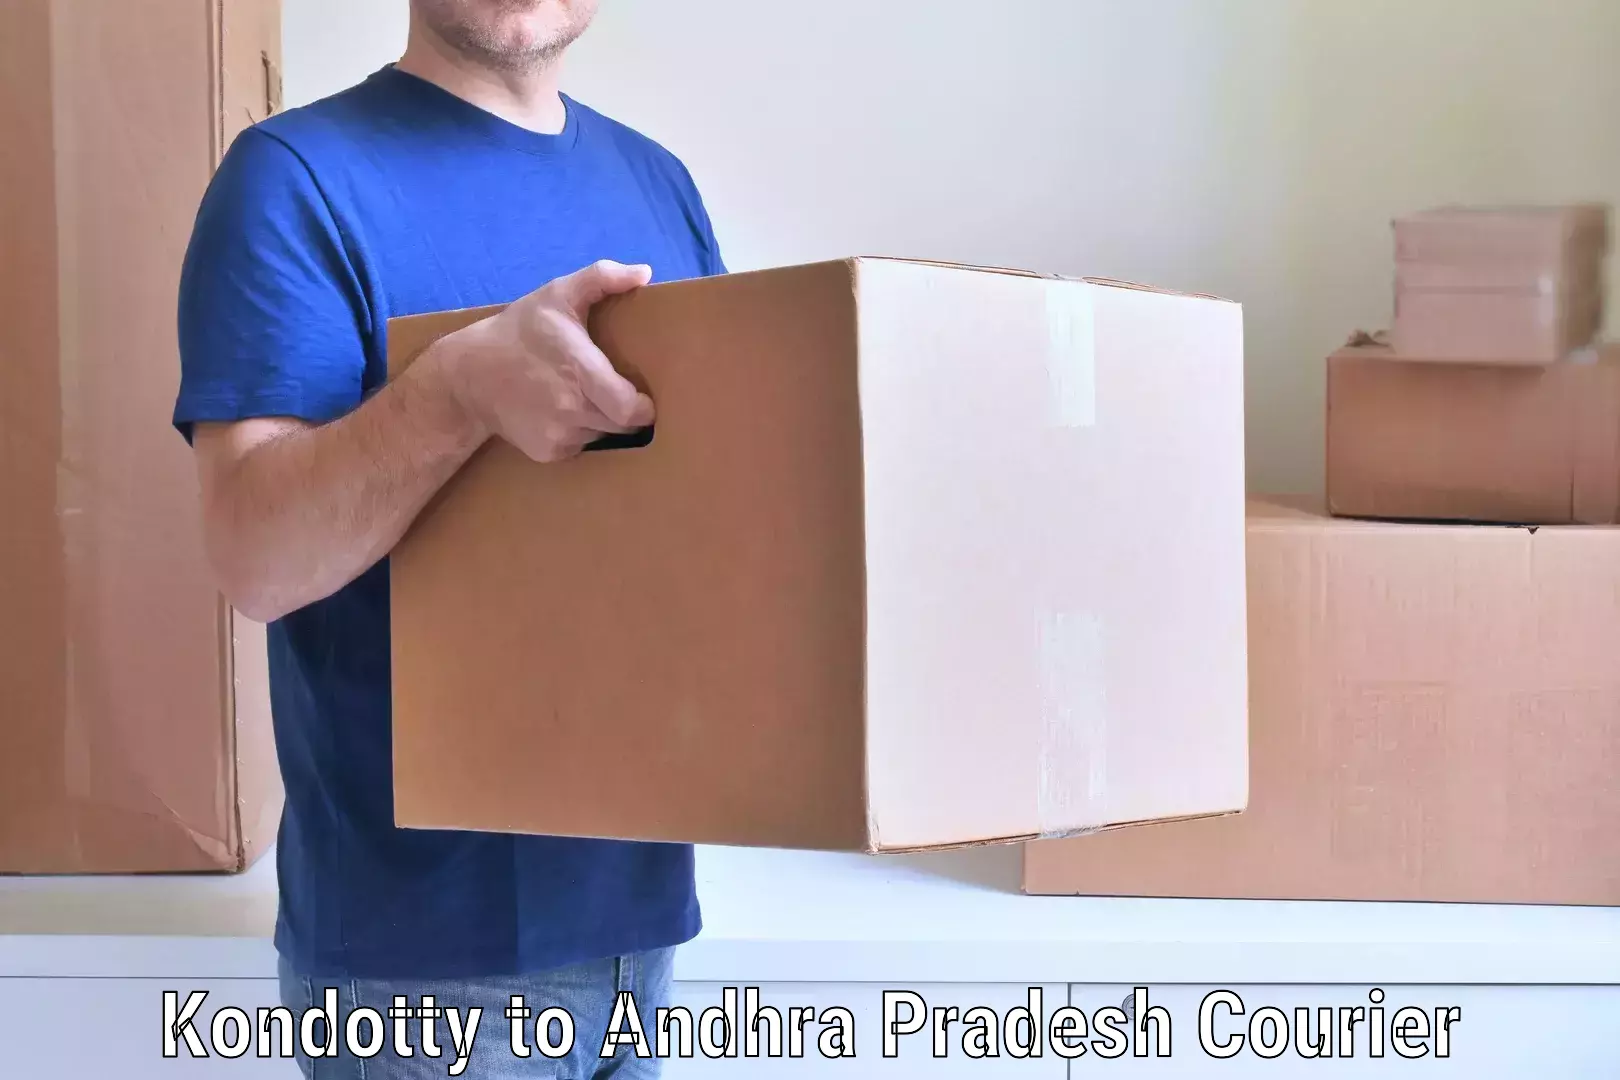 Quality relocation services in Kondotty to Visakhapatnam Port